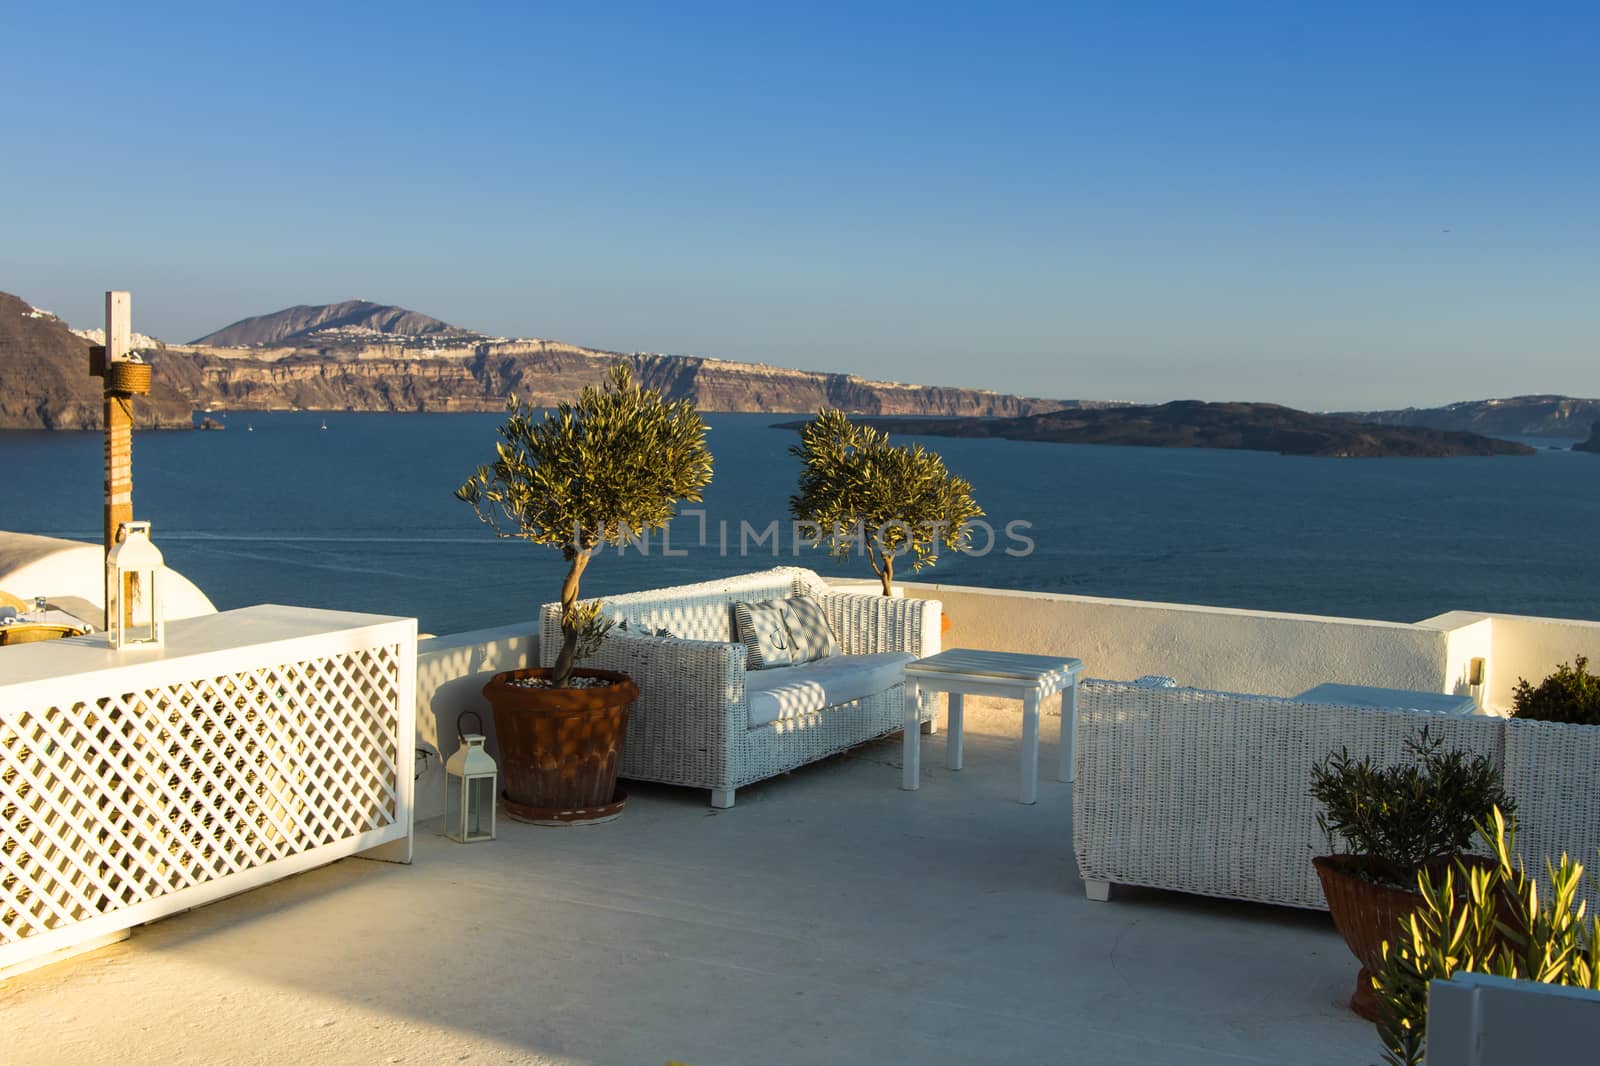 A tranquil terrace under the setting sun in the beautiful greek island